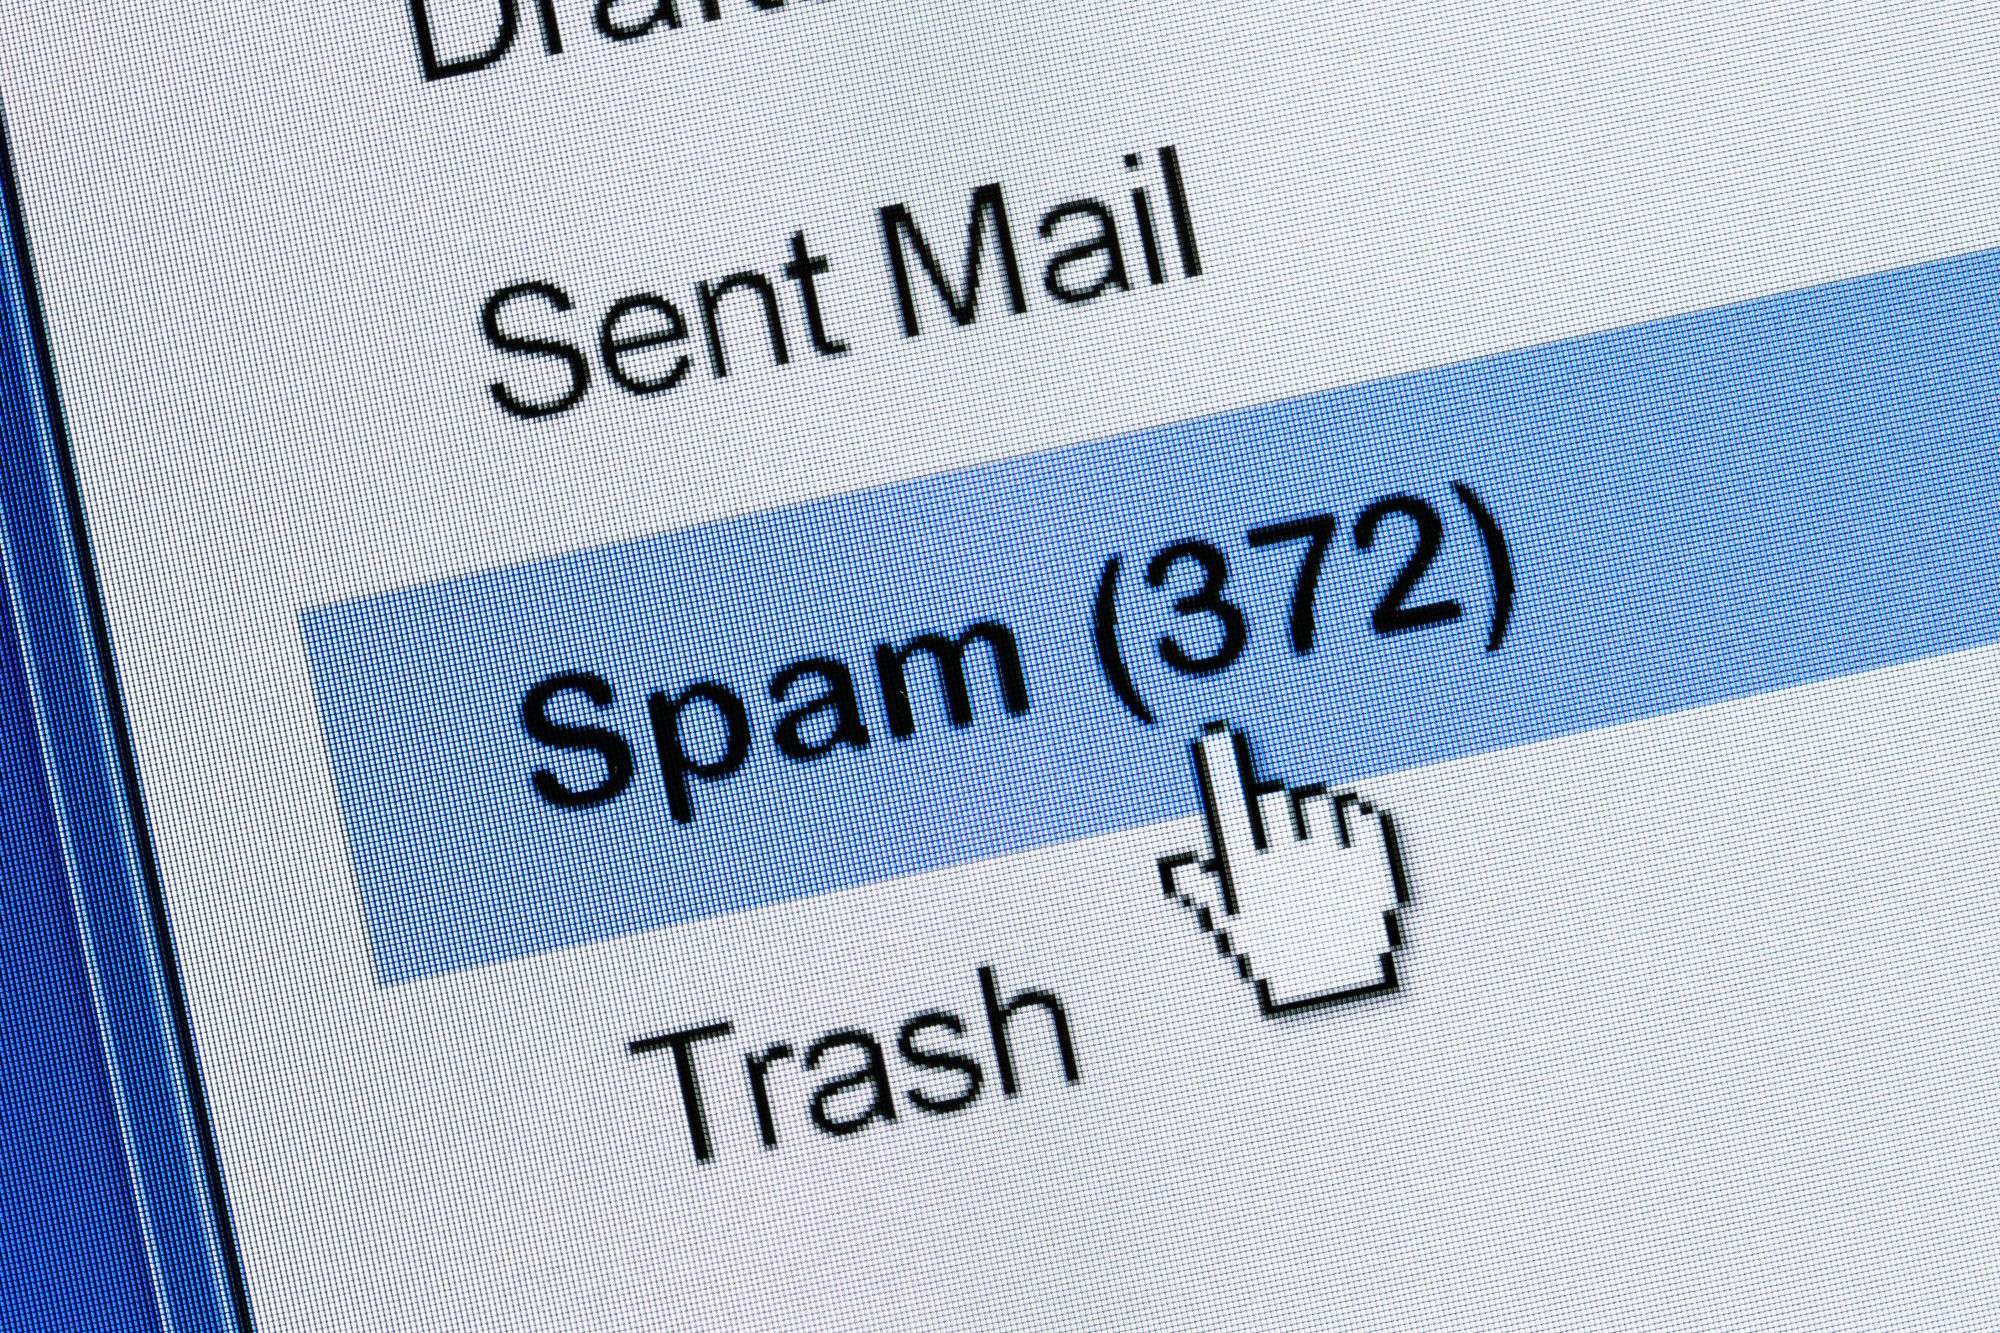 How to Reduce Spam Email Forever